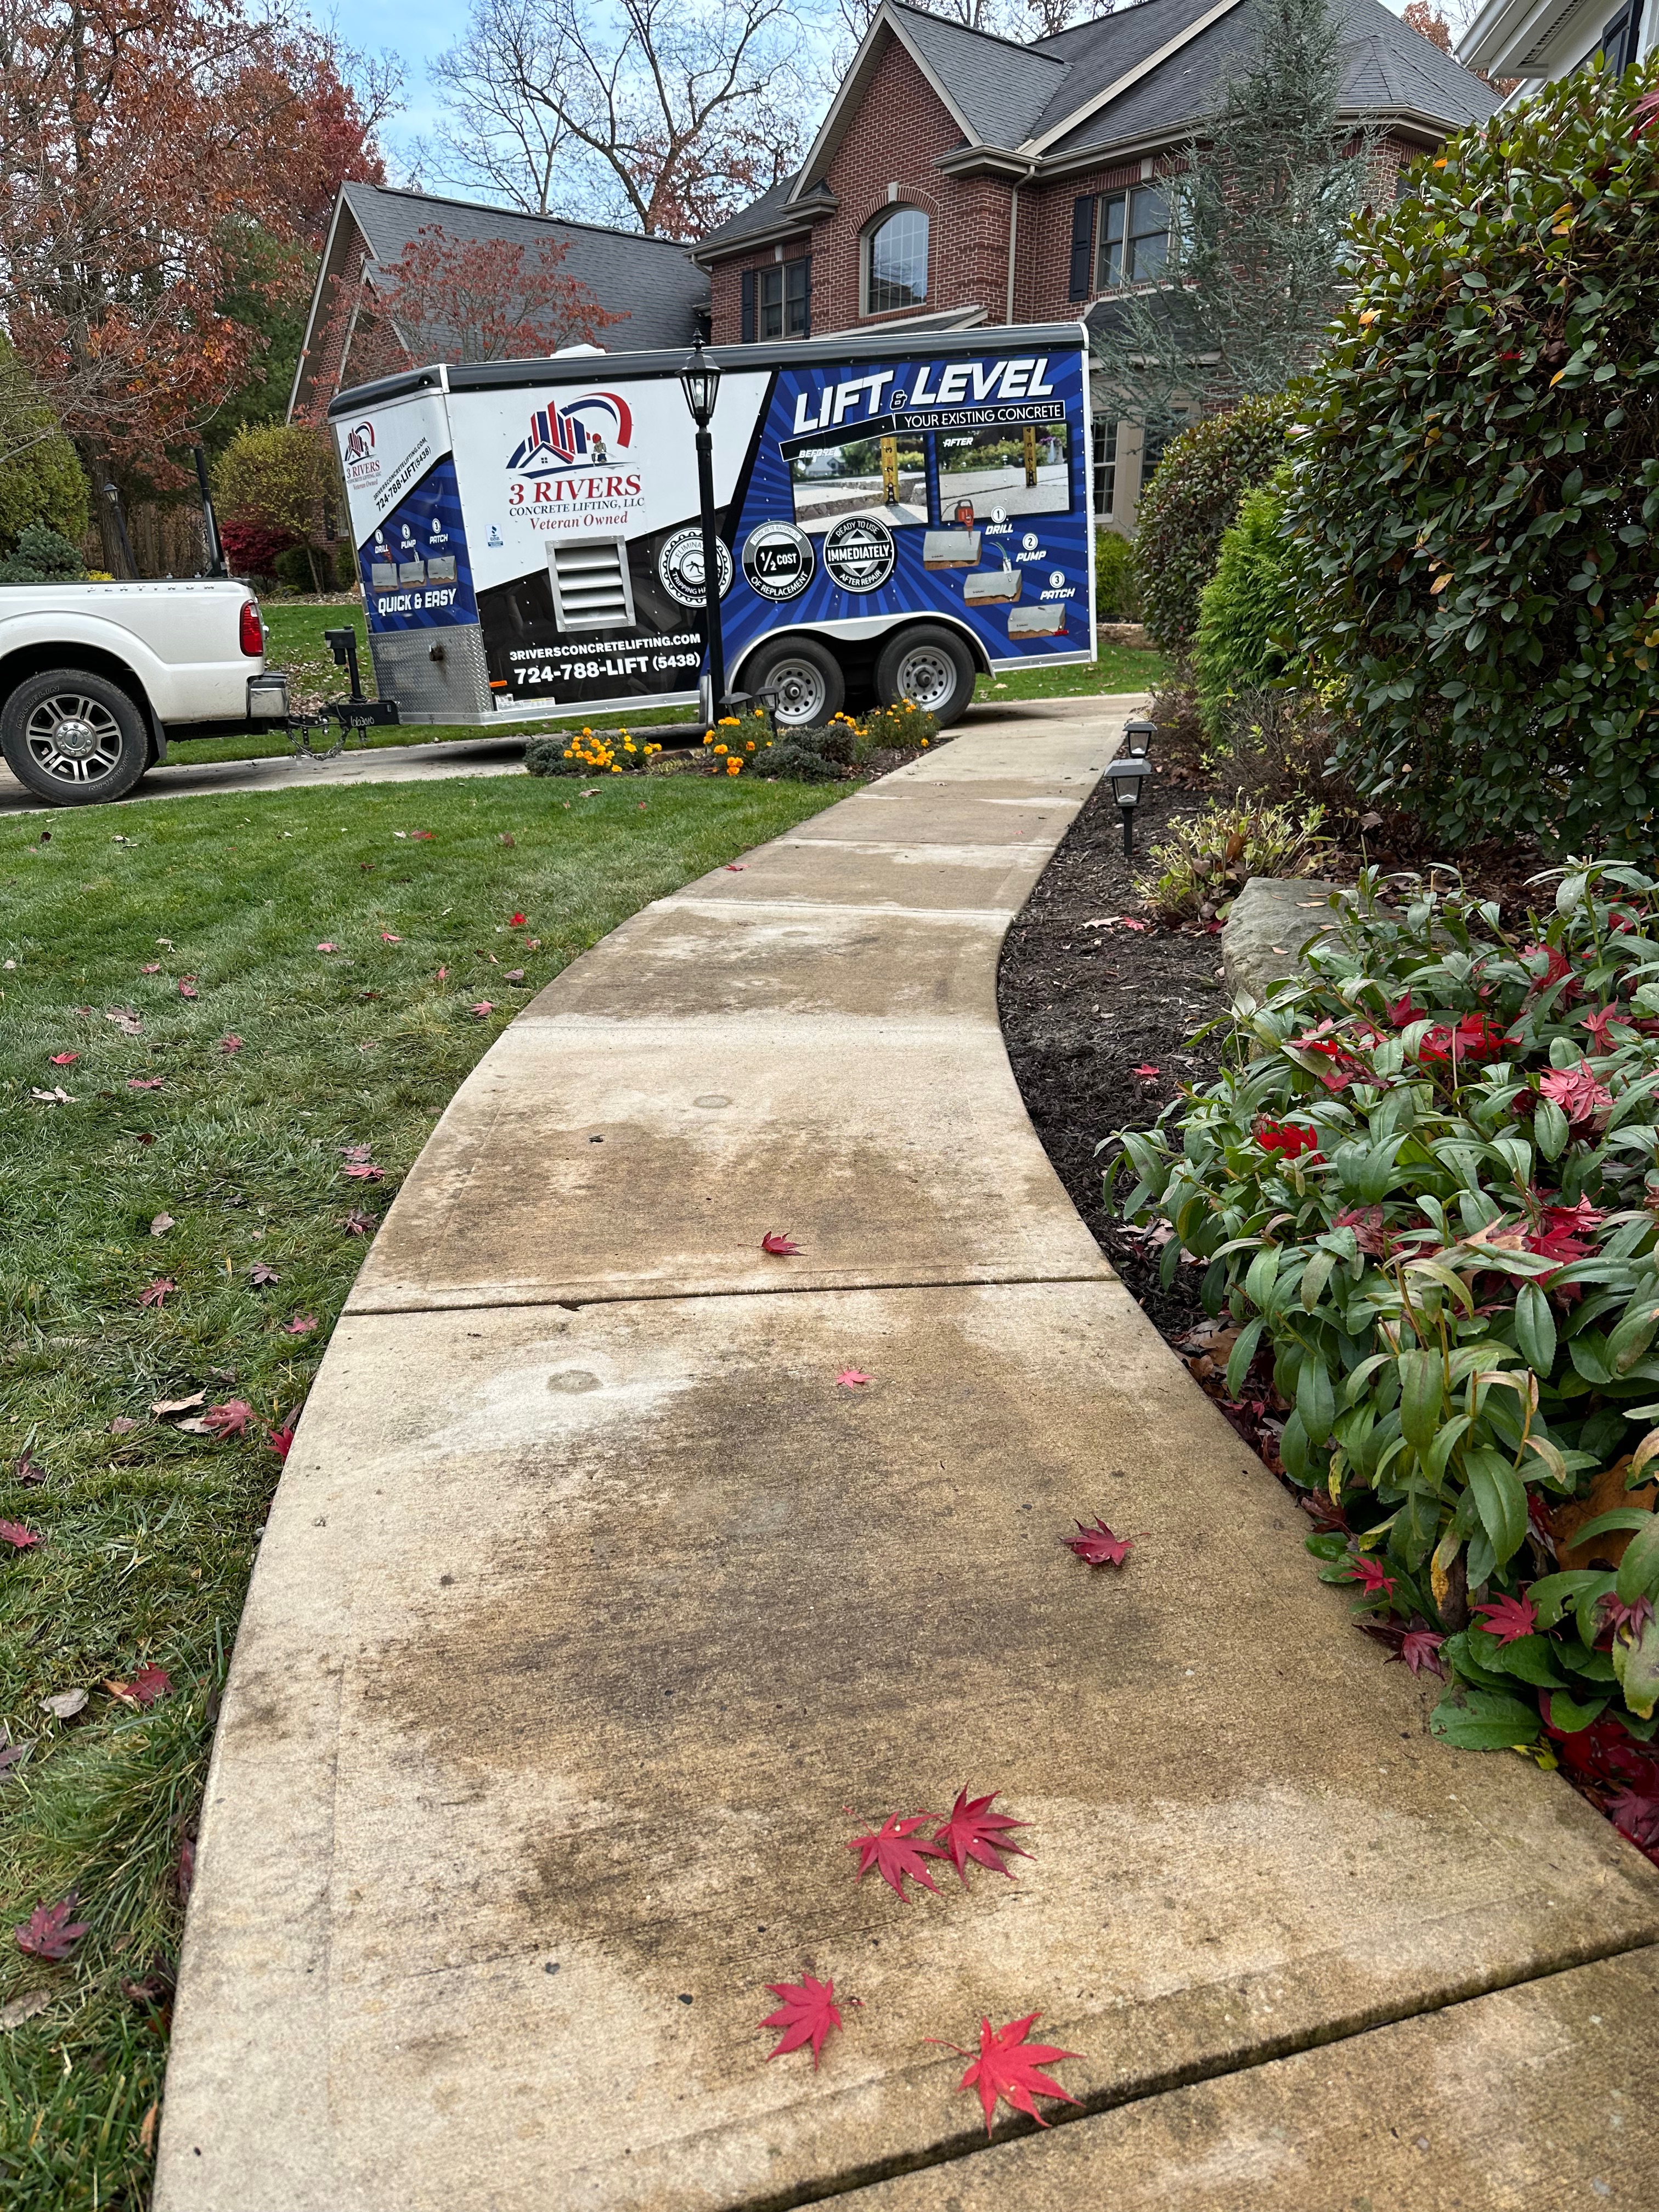 Walkway Lift and Level in Cranberry Township, PA